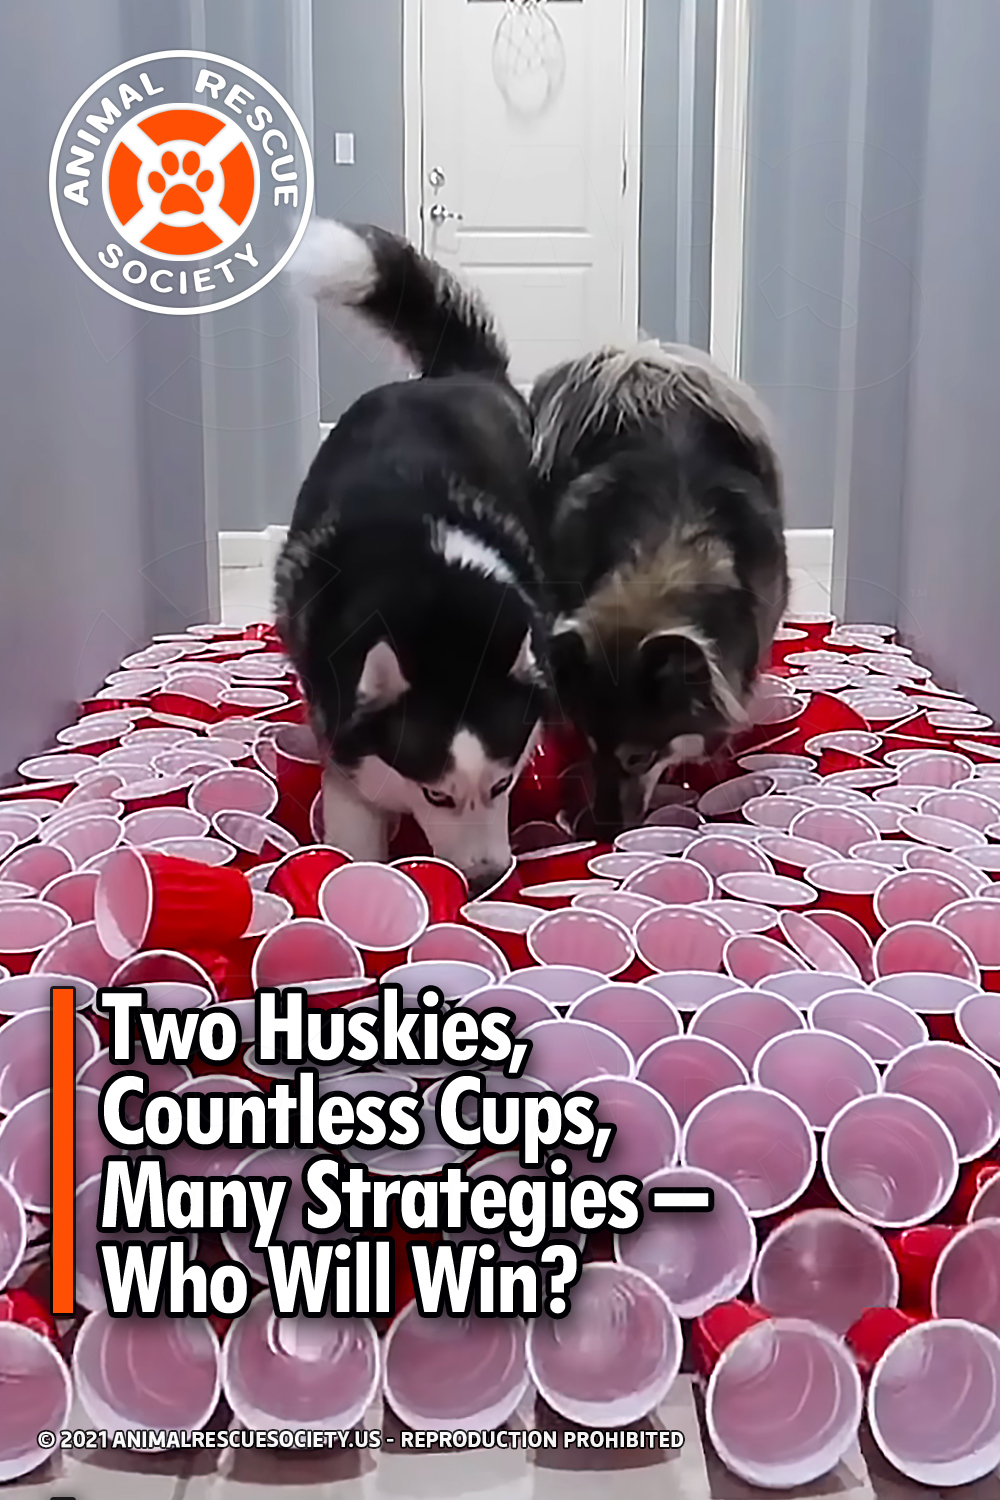 Two Huskies, Countless Cups, Many Strategies – Who Will Win?